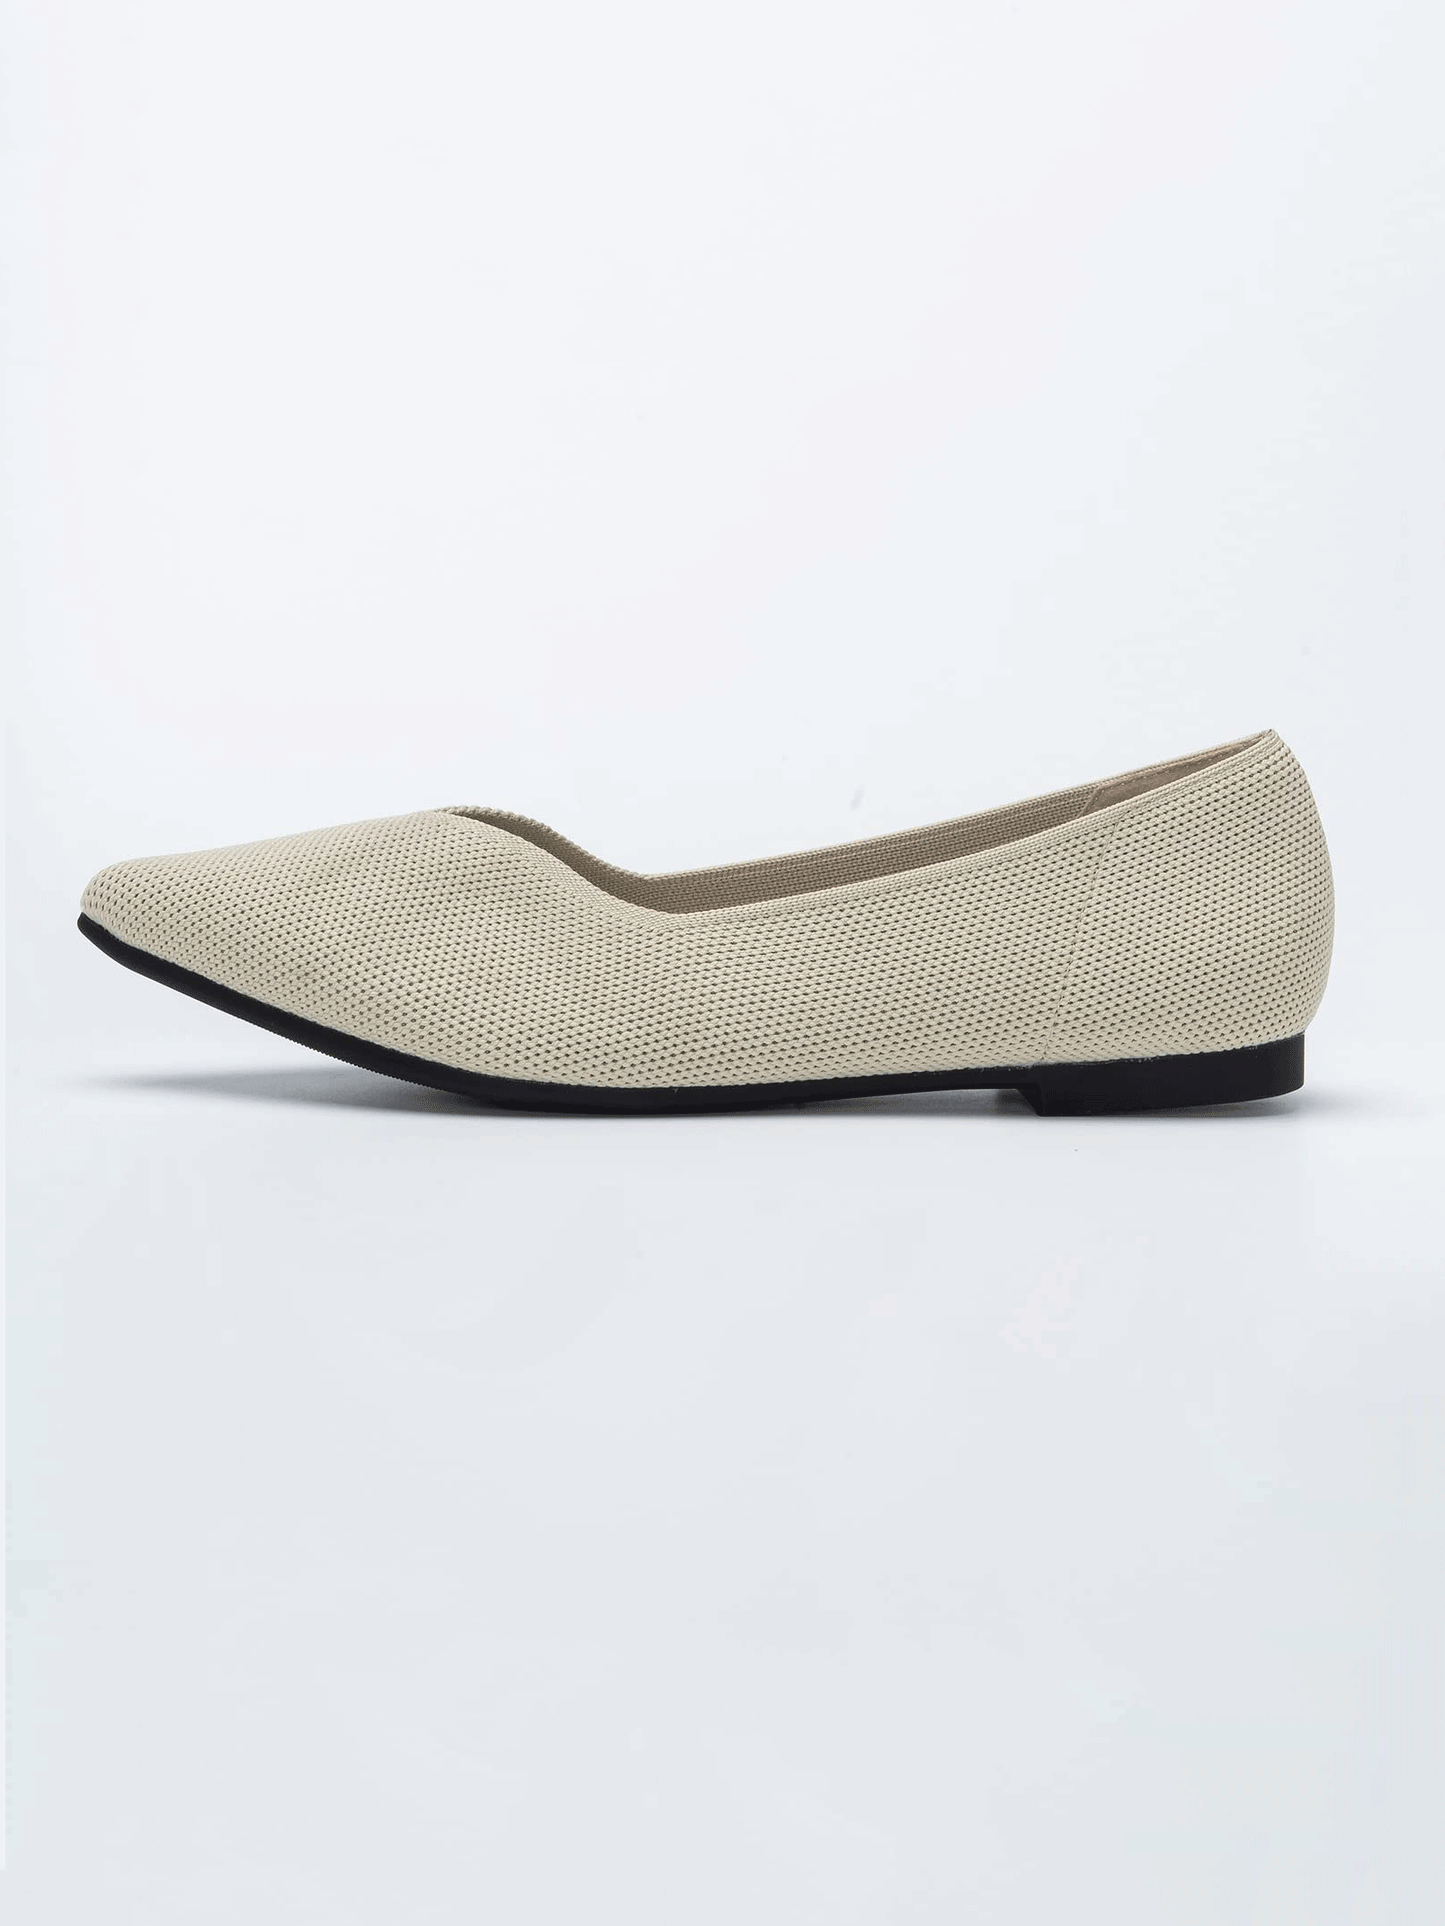 Knitted Pointed Toe Flats Shoes - ECHOINE